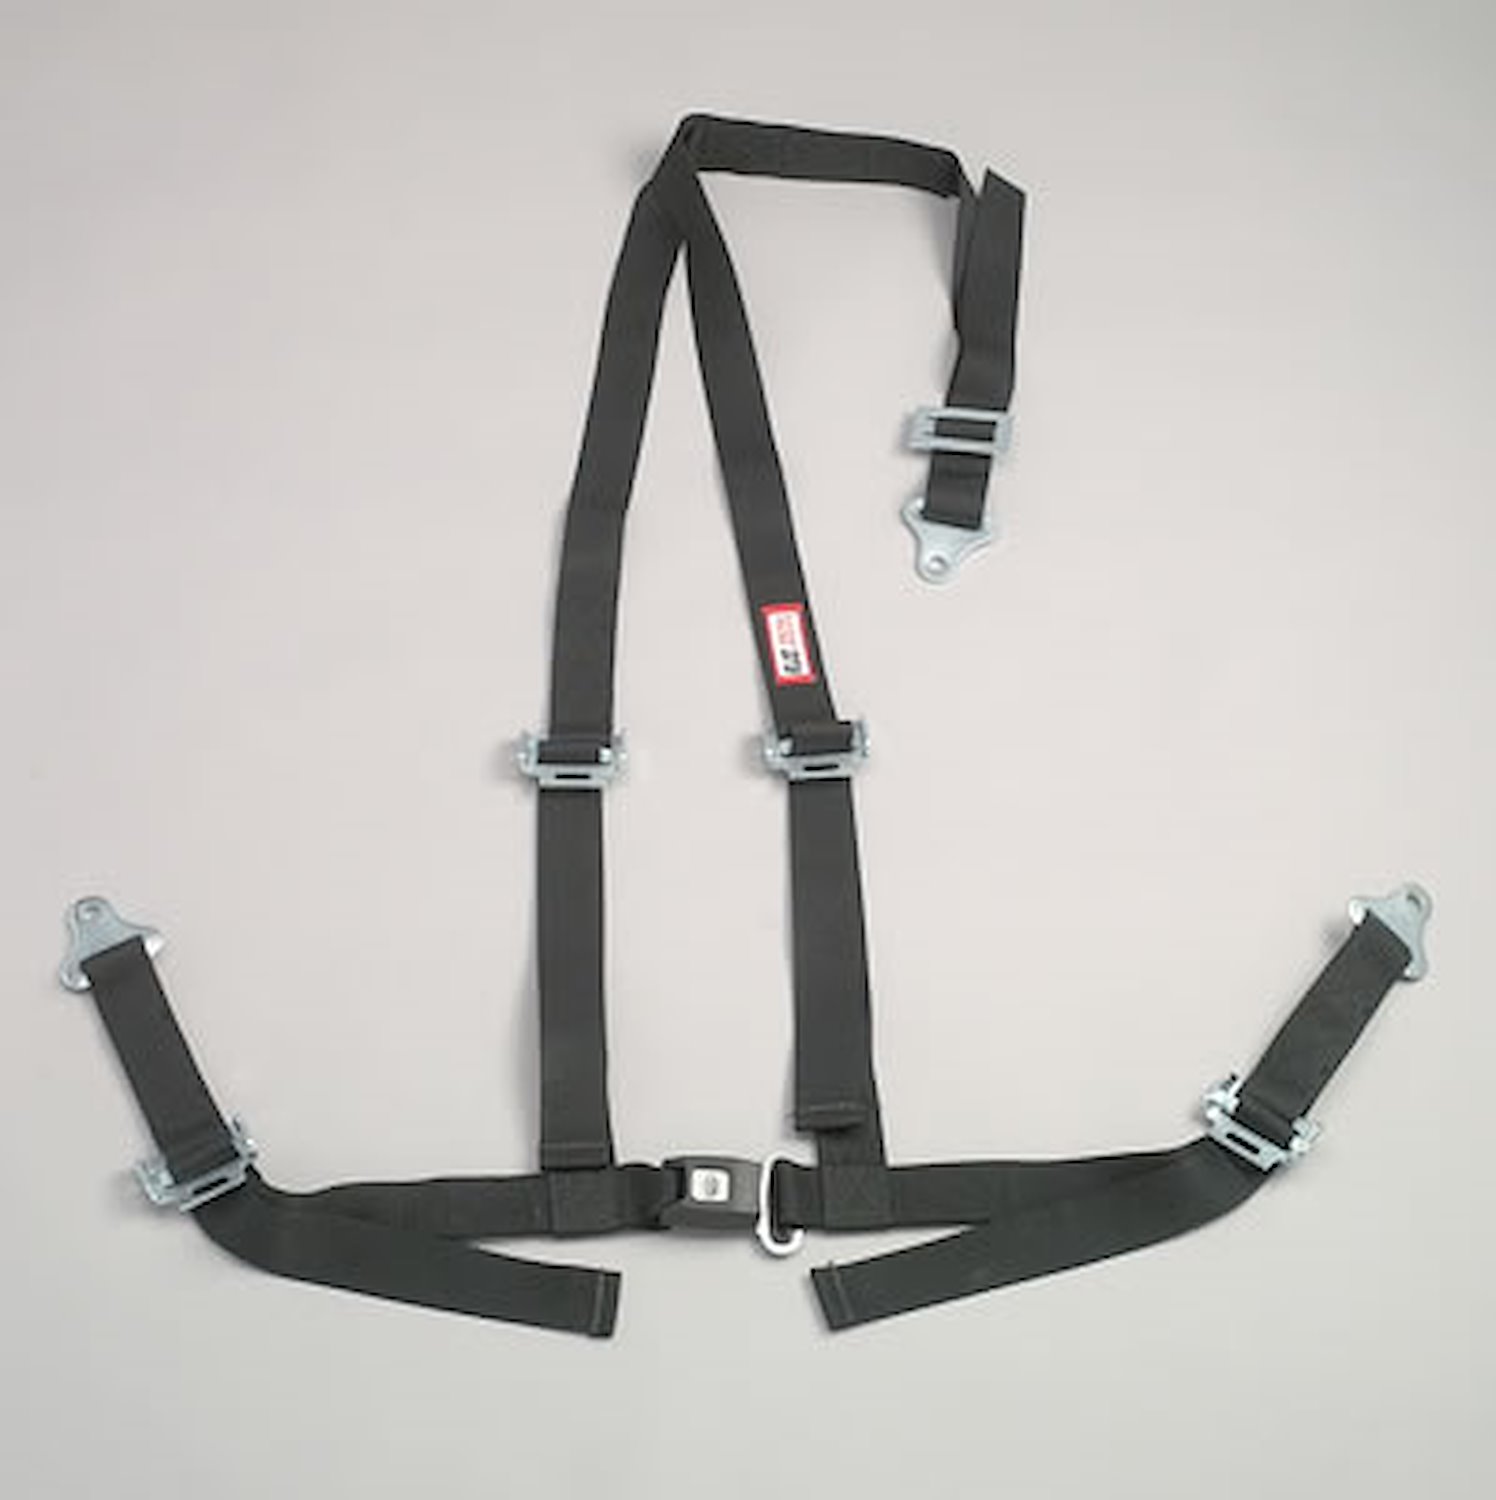 NON-SFI B&T HARNESS 2 PULL UP Lap Belt SNAP 2 S. H. Y FLOOR Mount WRAP/BOLT YELLOW